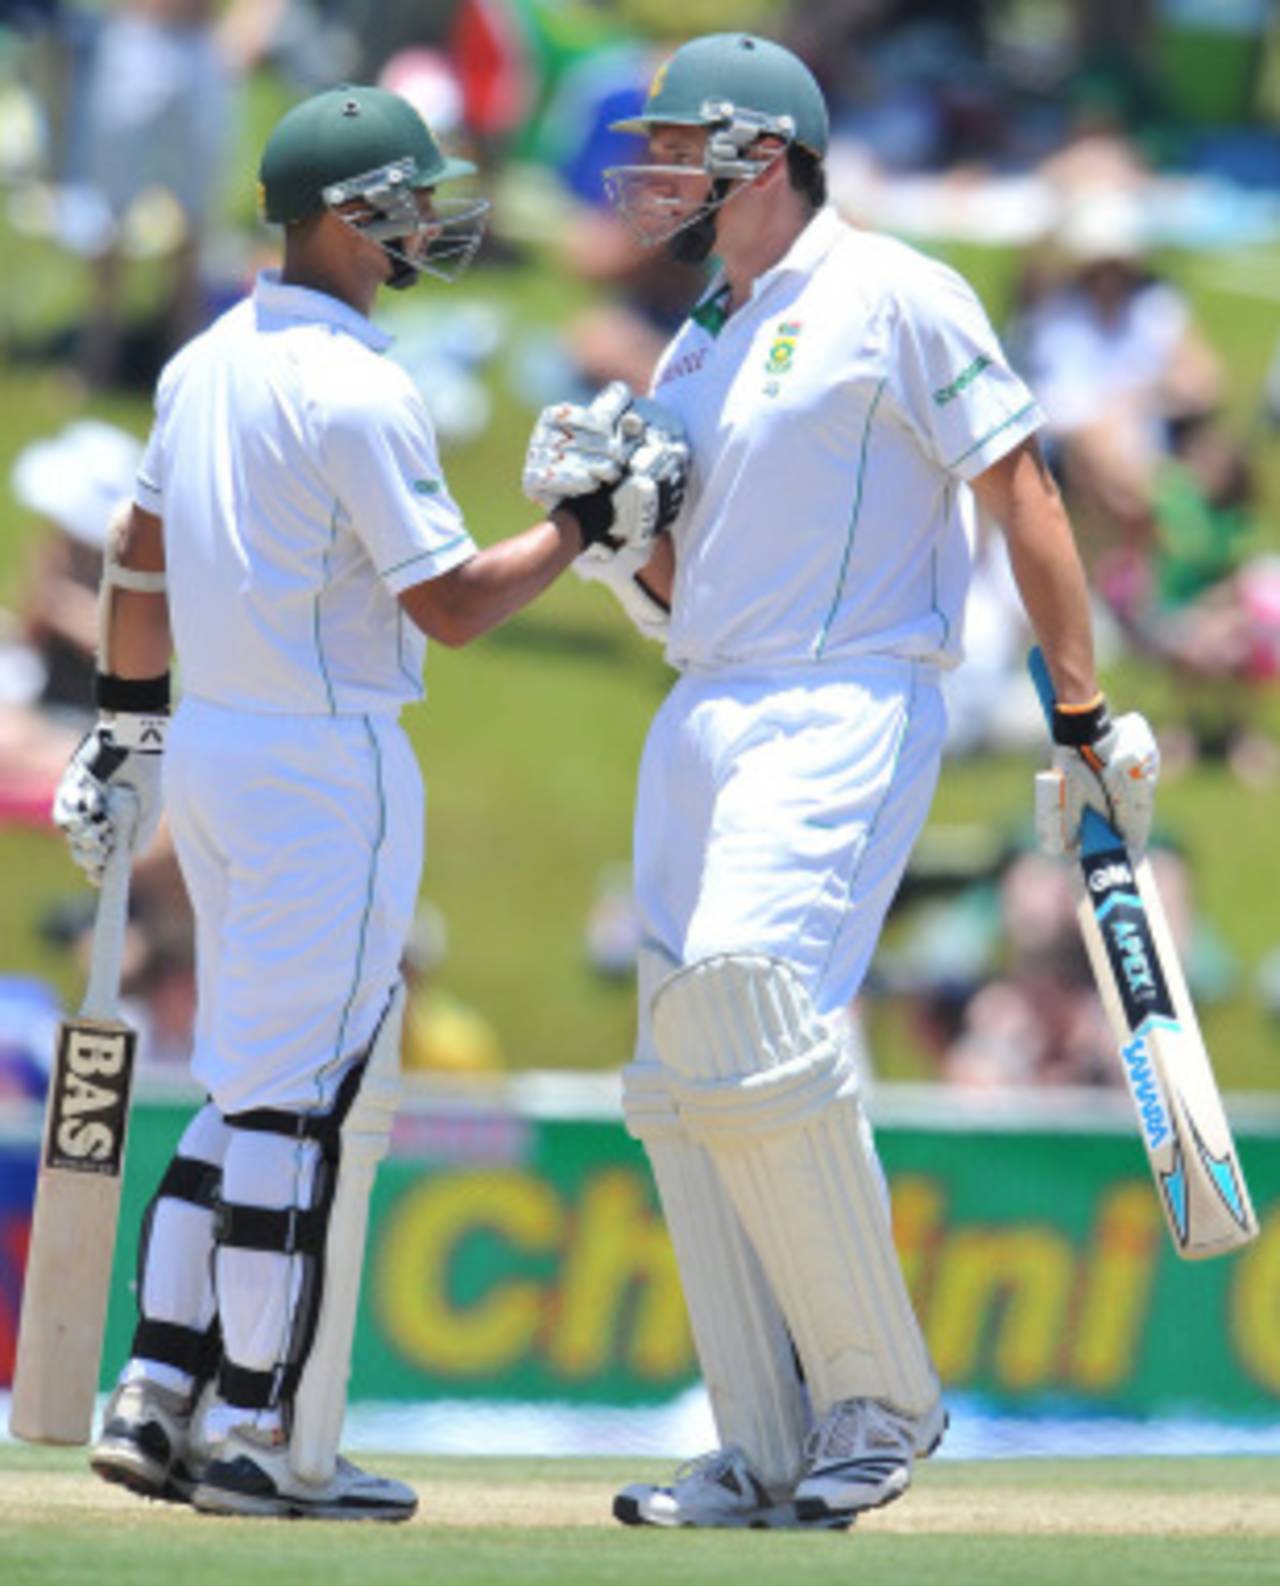 Graeme Smith: "Alviro Petersen is carrying some terrific form at the moment and hopefully we can gel that together."&nbsp;&nbsp;&bull;&nbsp;&nbsp;AFP